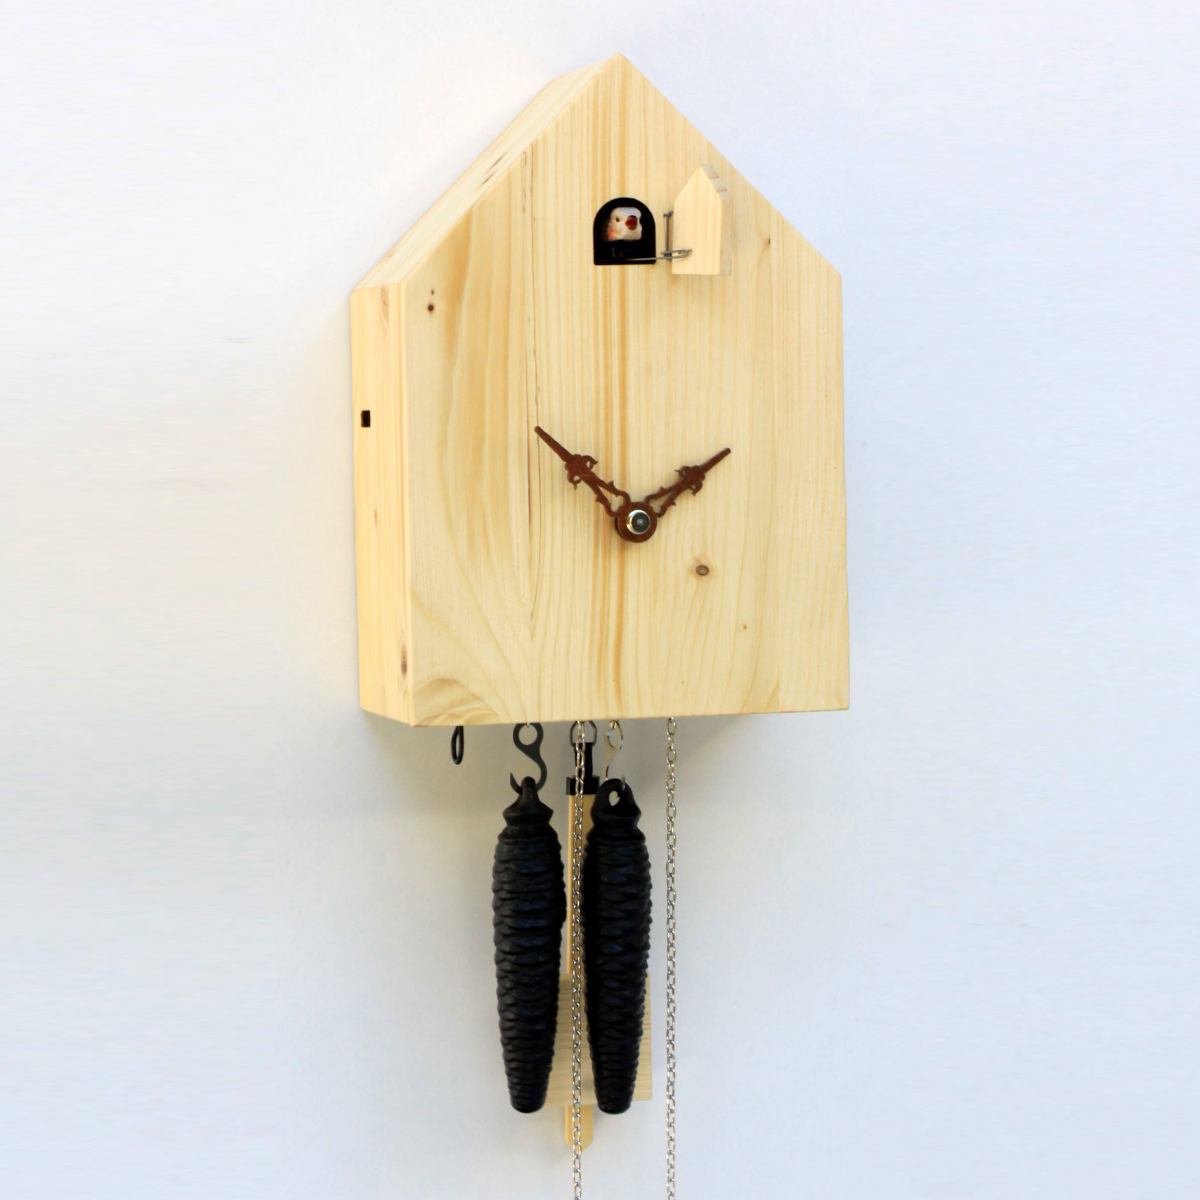 Original Black Forest Design Cuckoo Clock with Mechanical Pendulum (natural wood, stained)